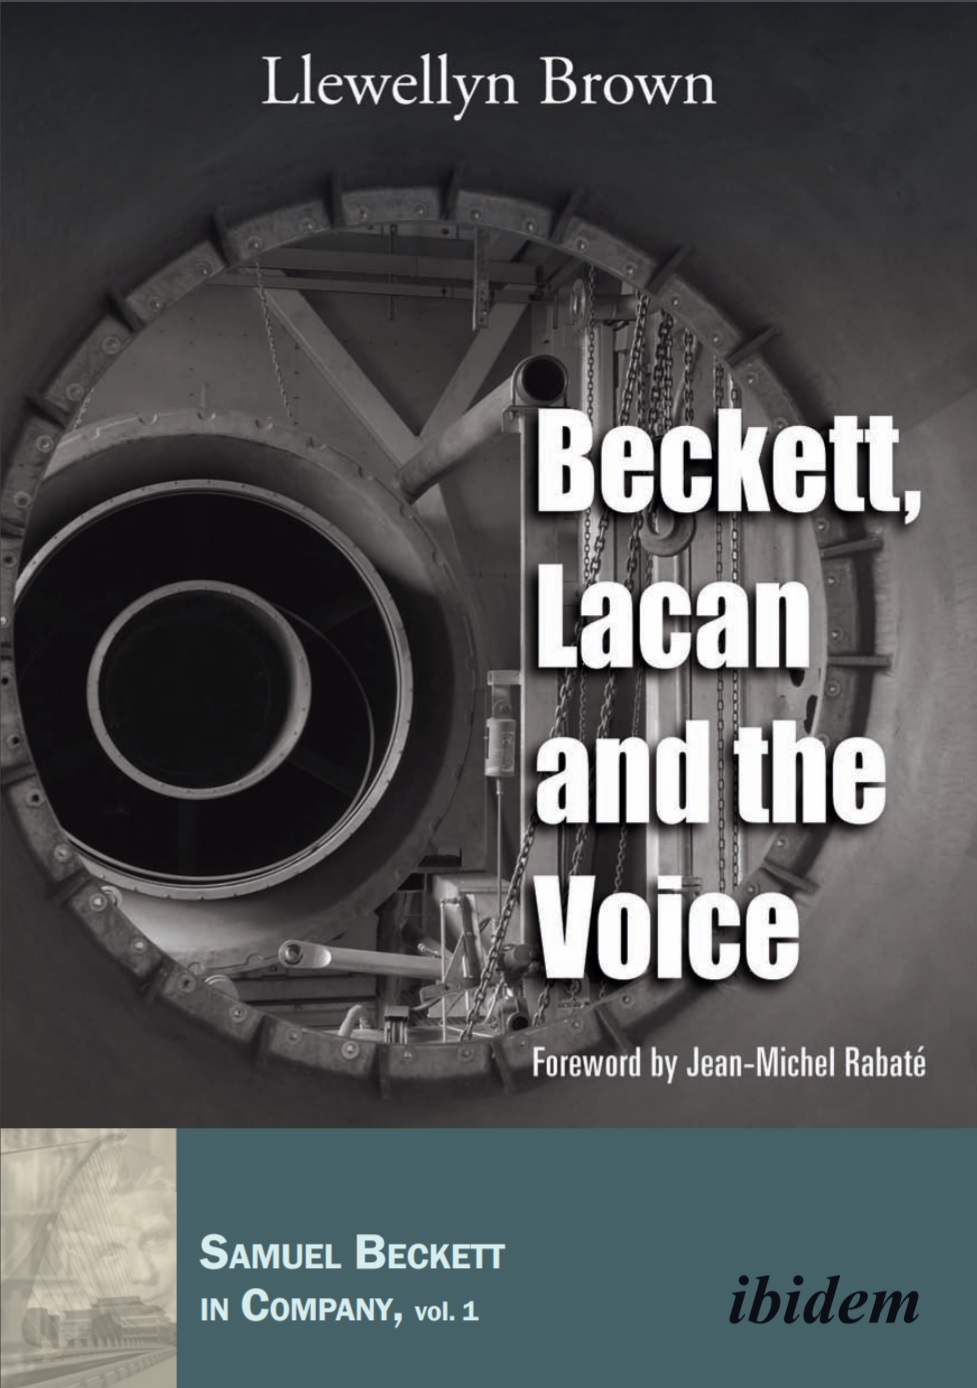 Beckett-lacan-and-the-voice.jpg